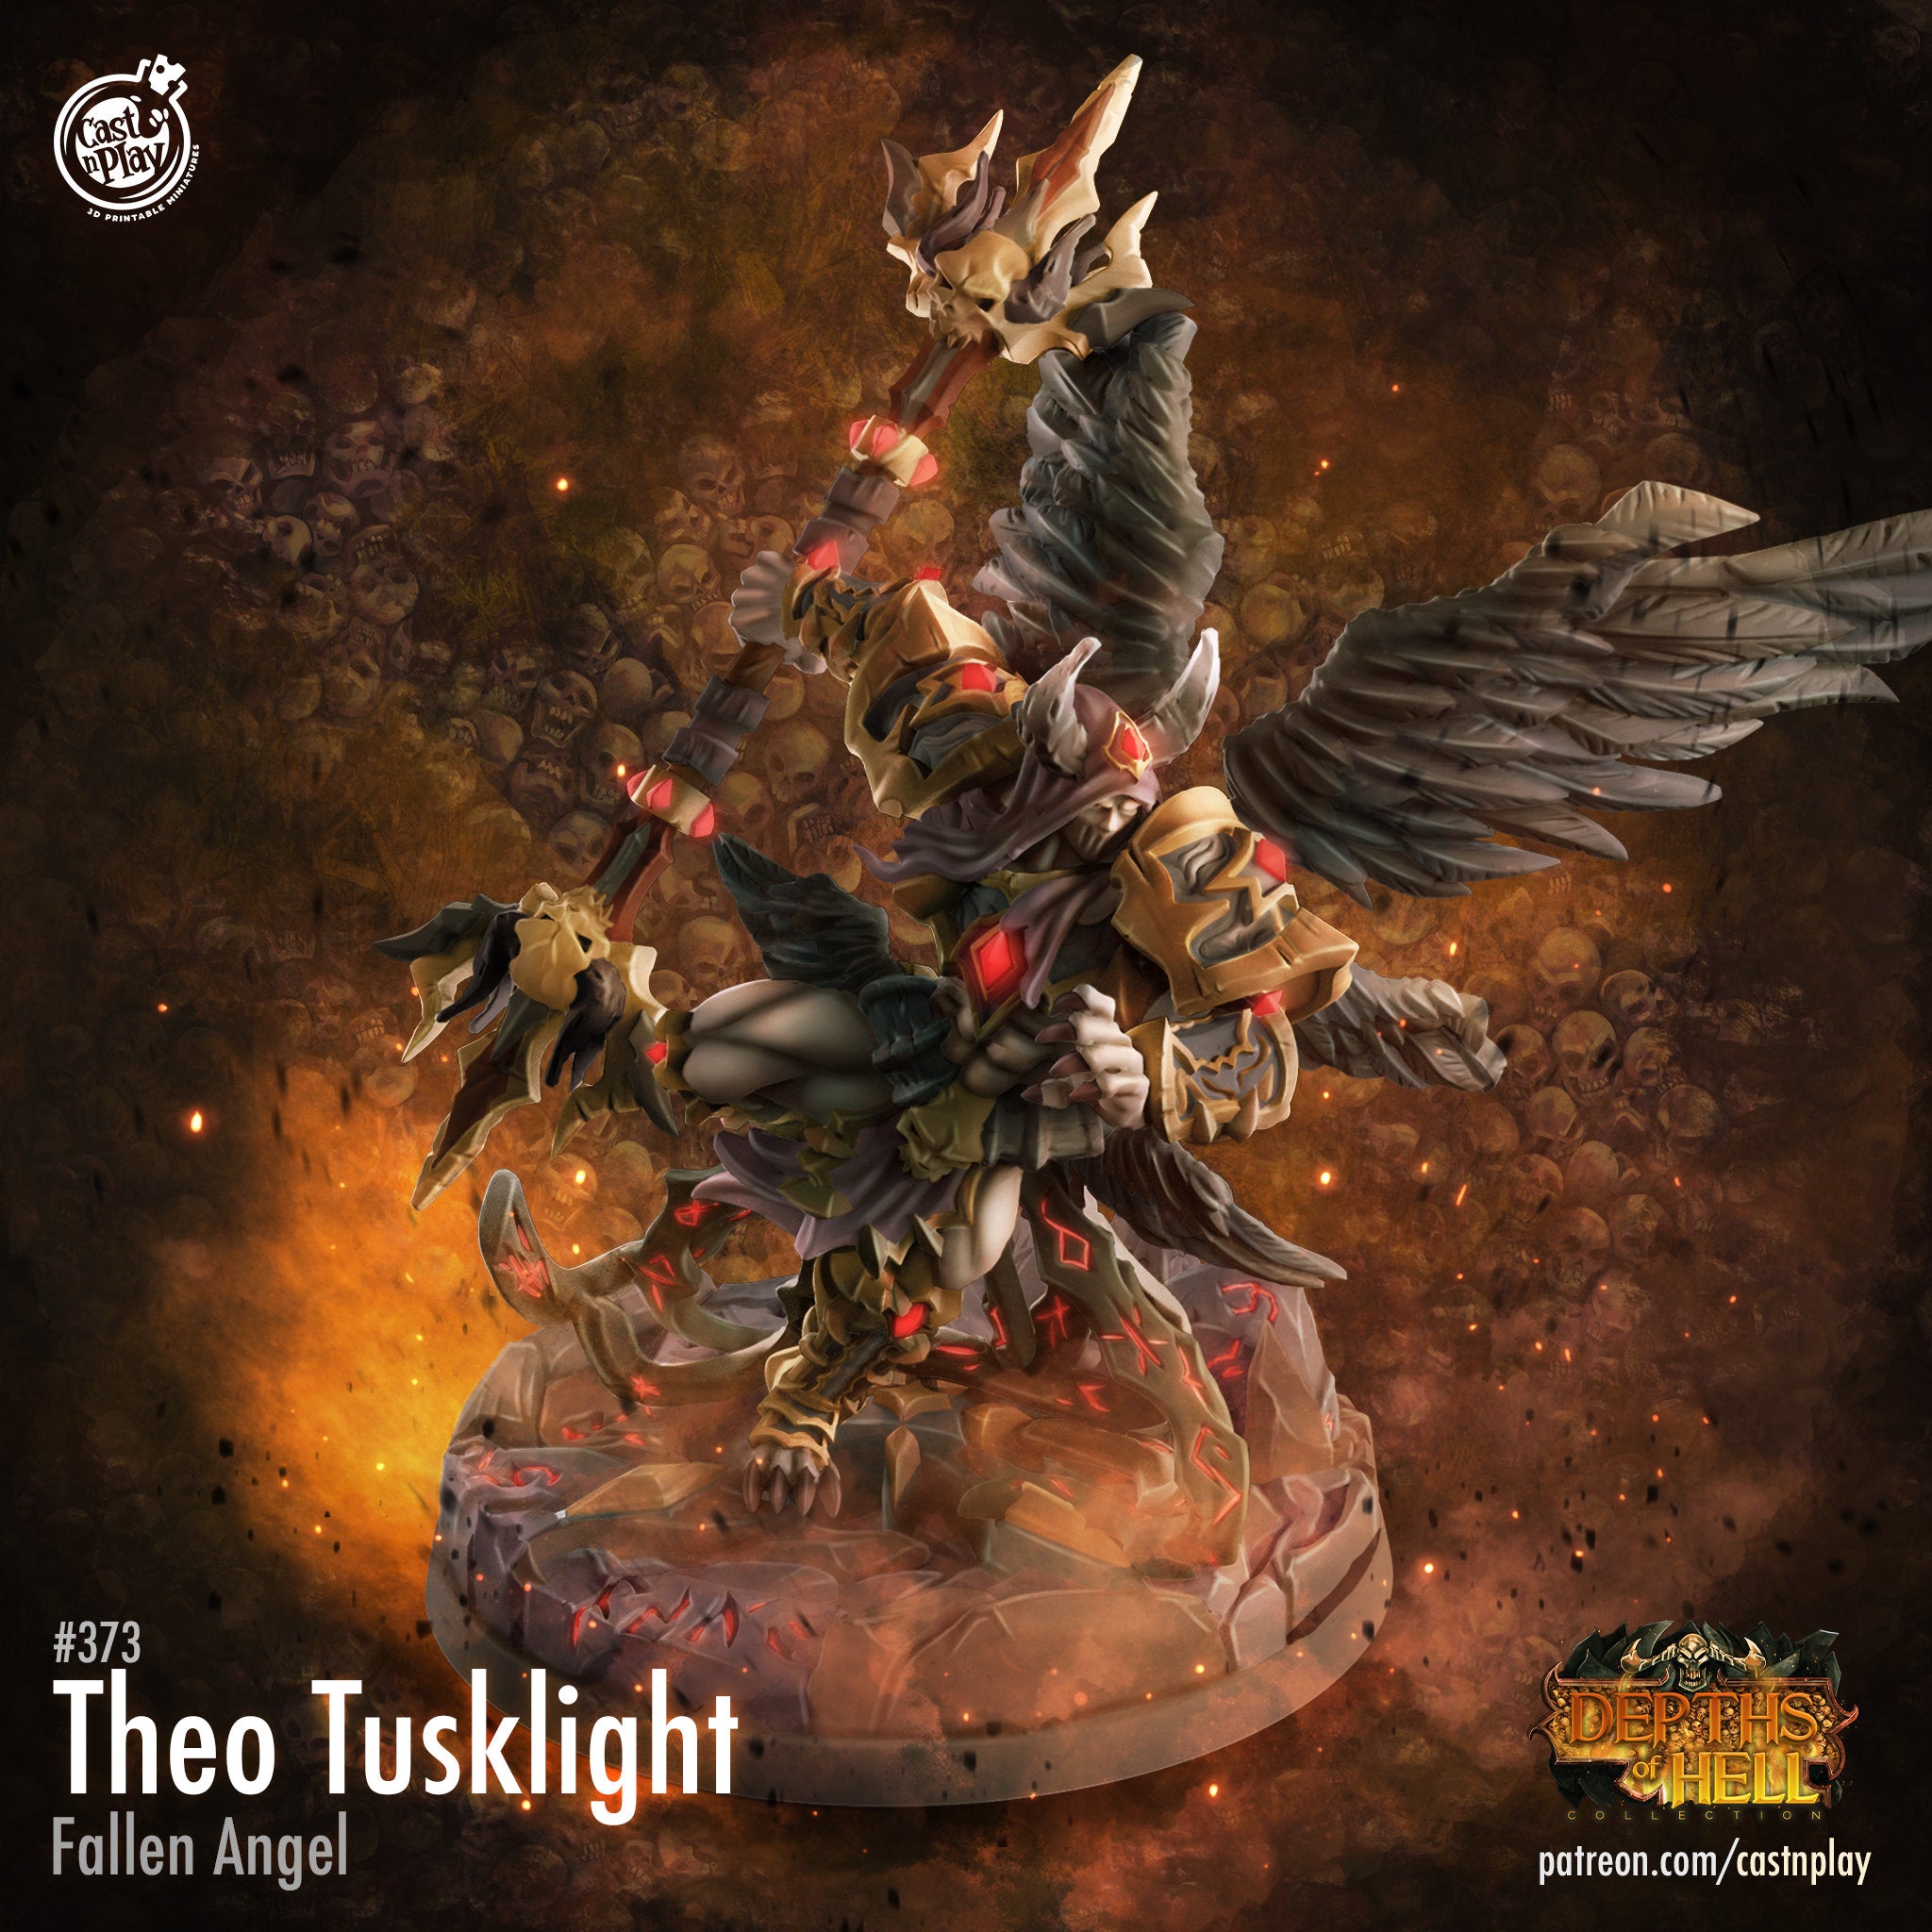 Theo Tusklight Cast N Play Depths of Hell 3d Printed Miniature